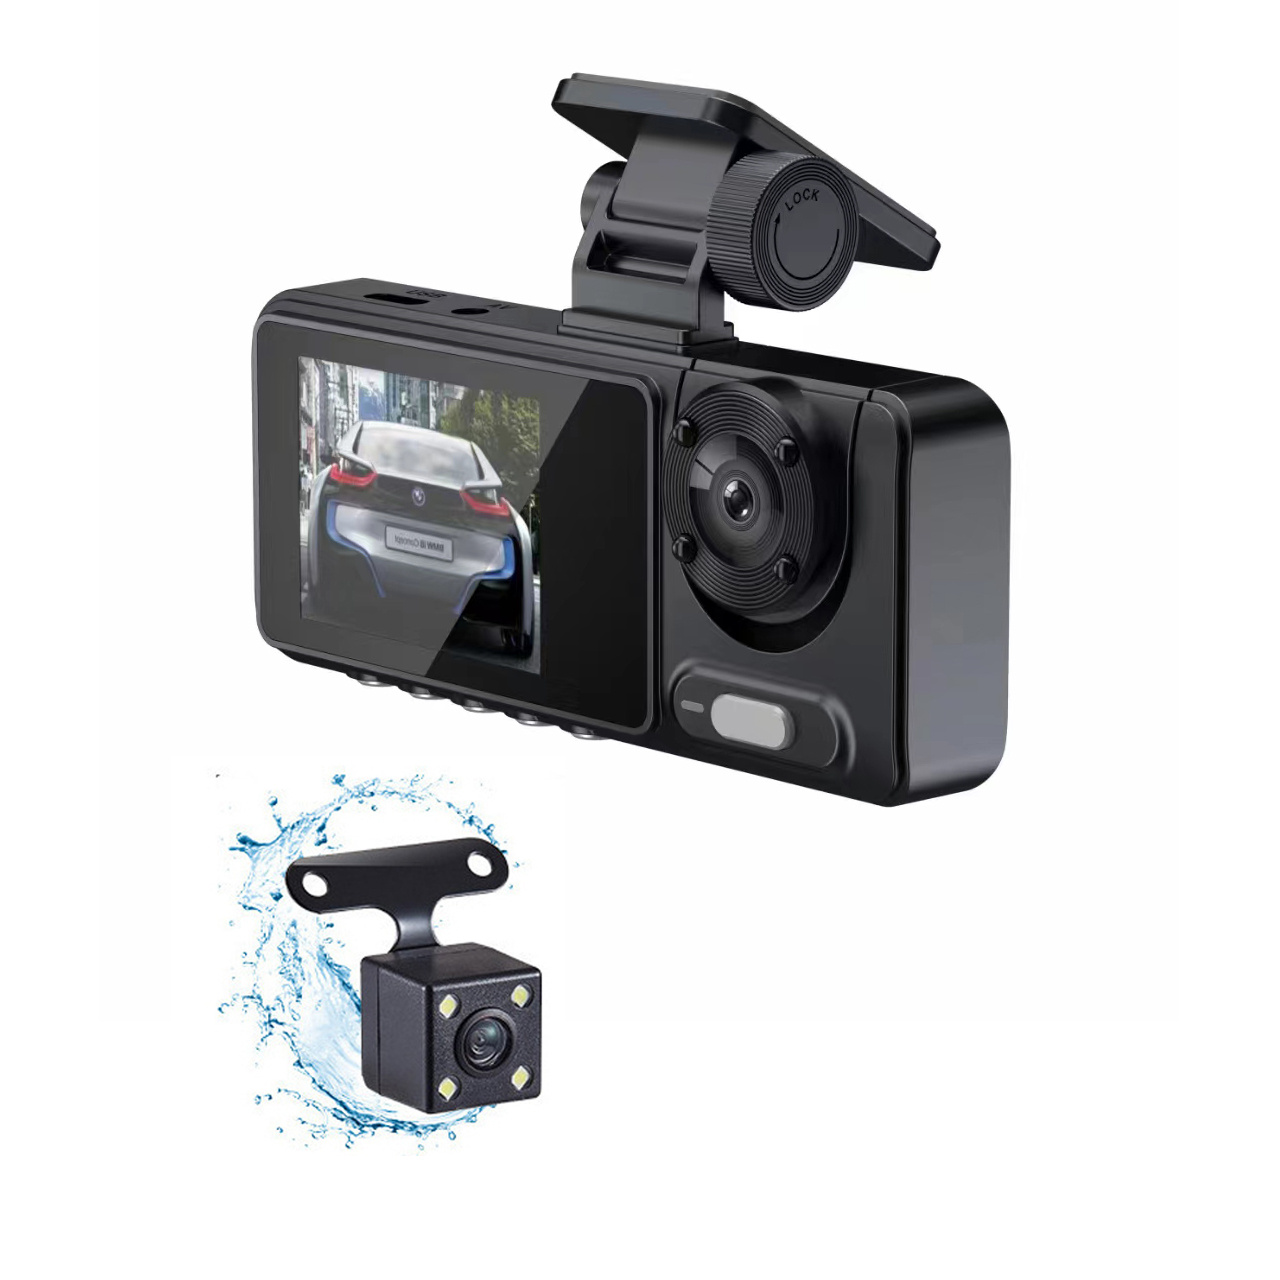 The ultimate dash camera with full vehicle monitoring